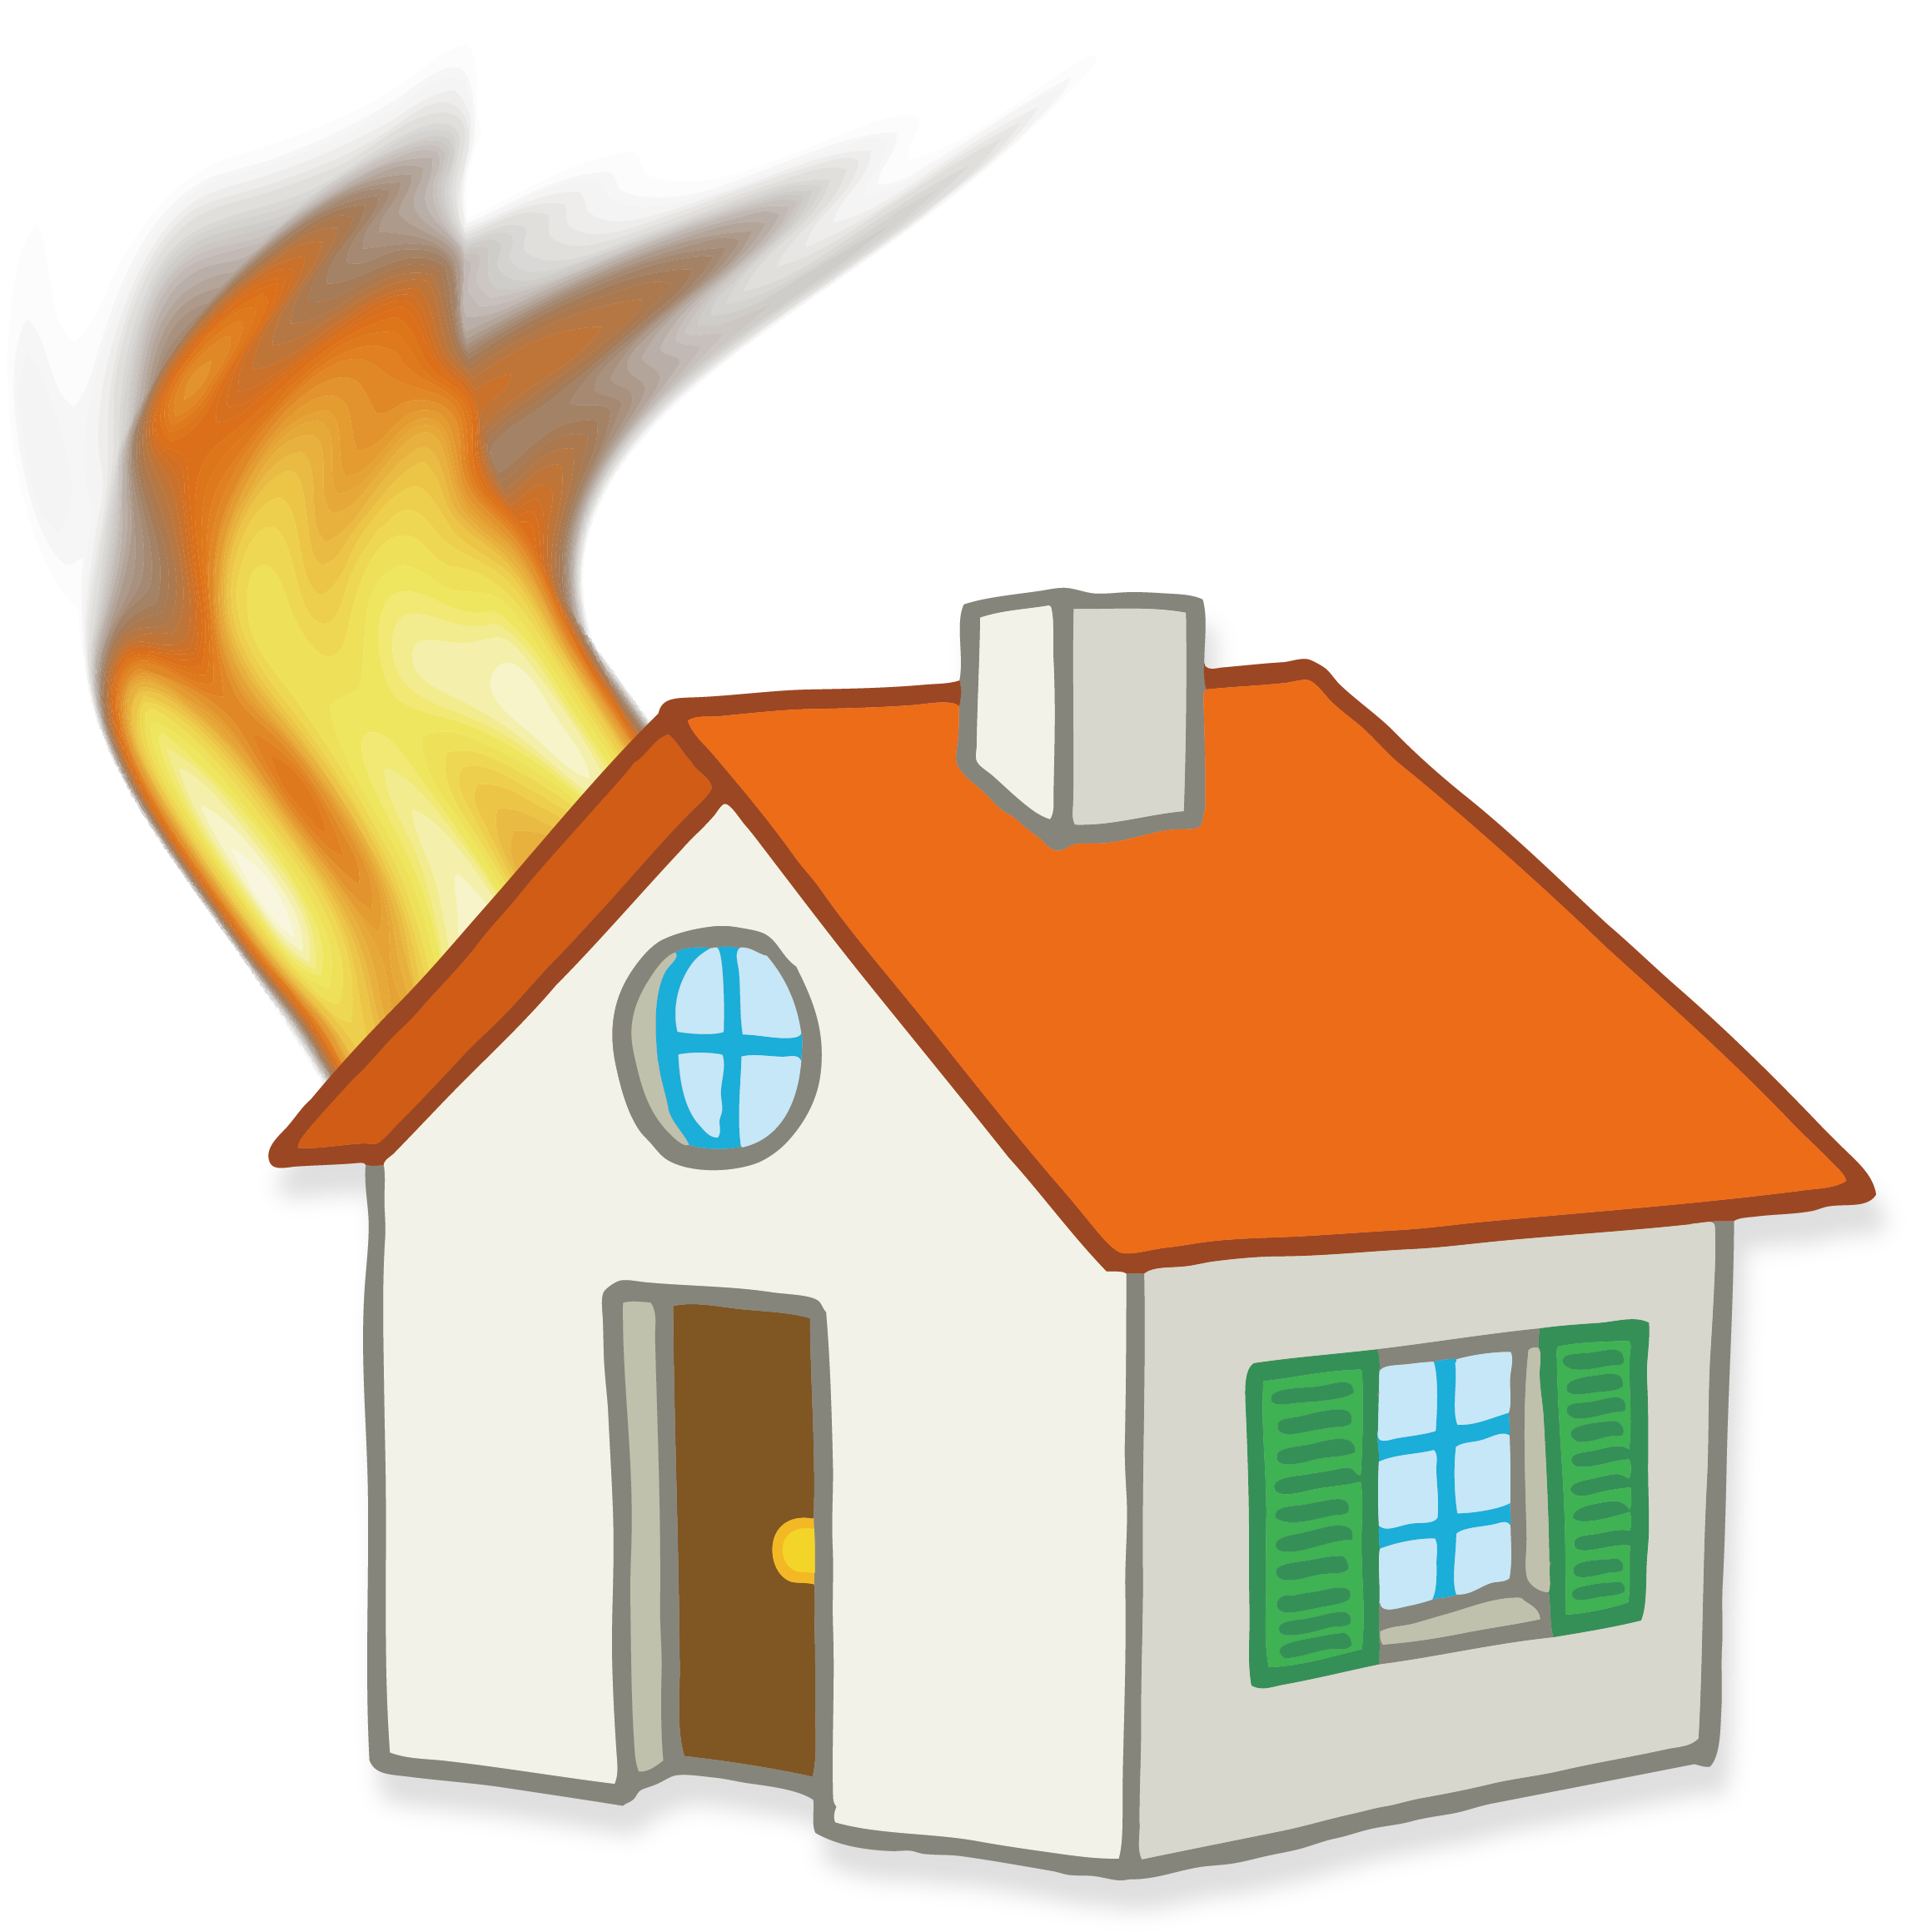 Fire Hydrant Icon - House On Fire Png (2302x2331)